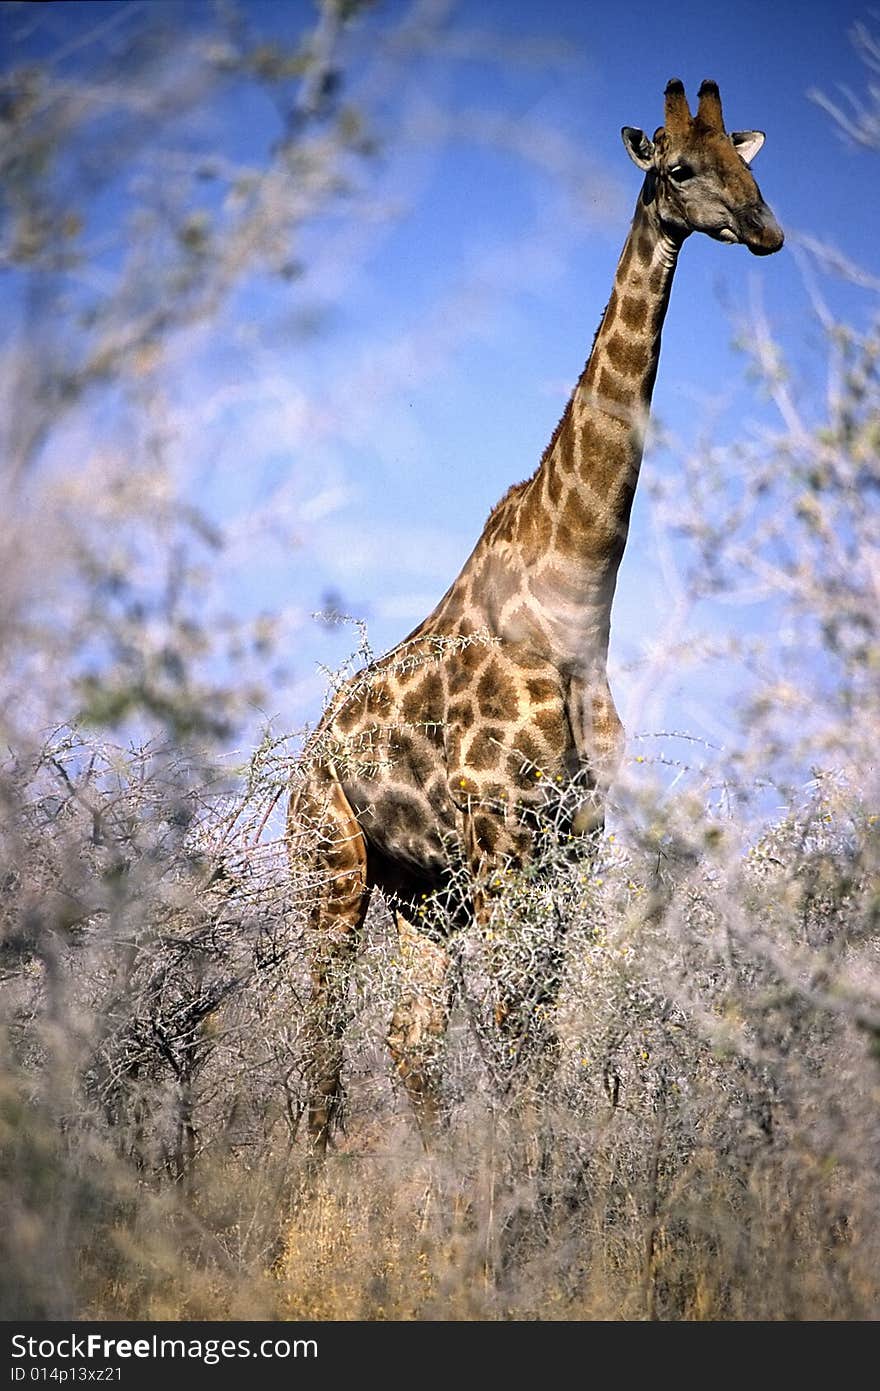 A giraffe eating leaves in the bush of the etosha park in namibia. A giraffe eating leaves in the bush of the etosha park in namibia